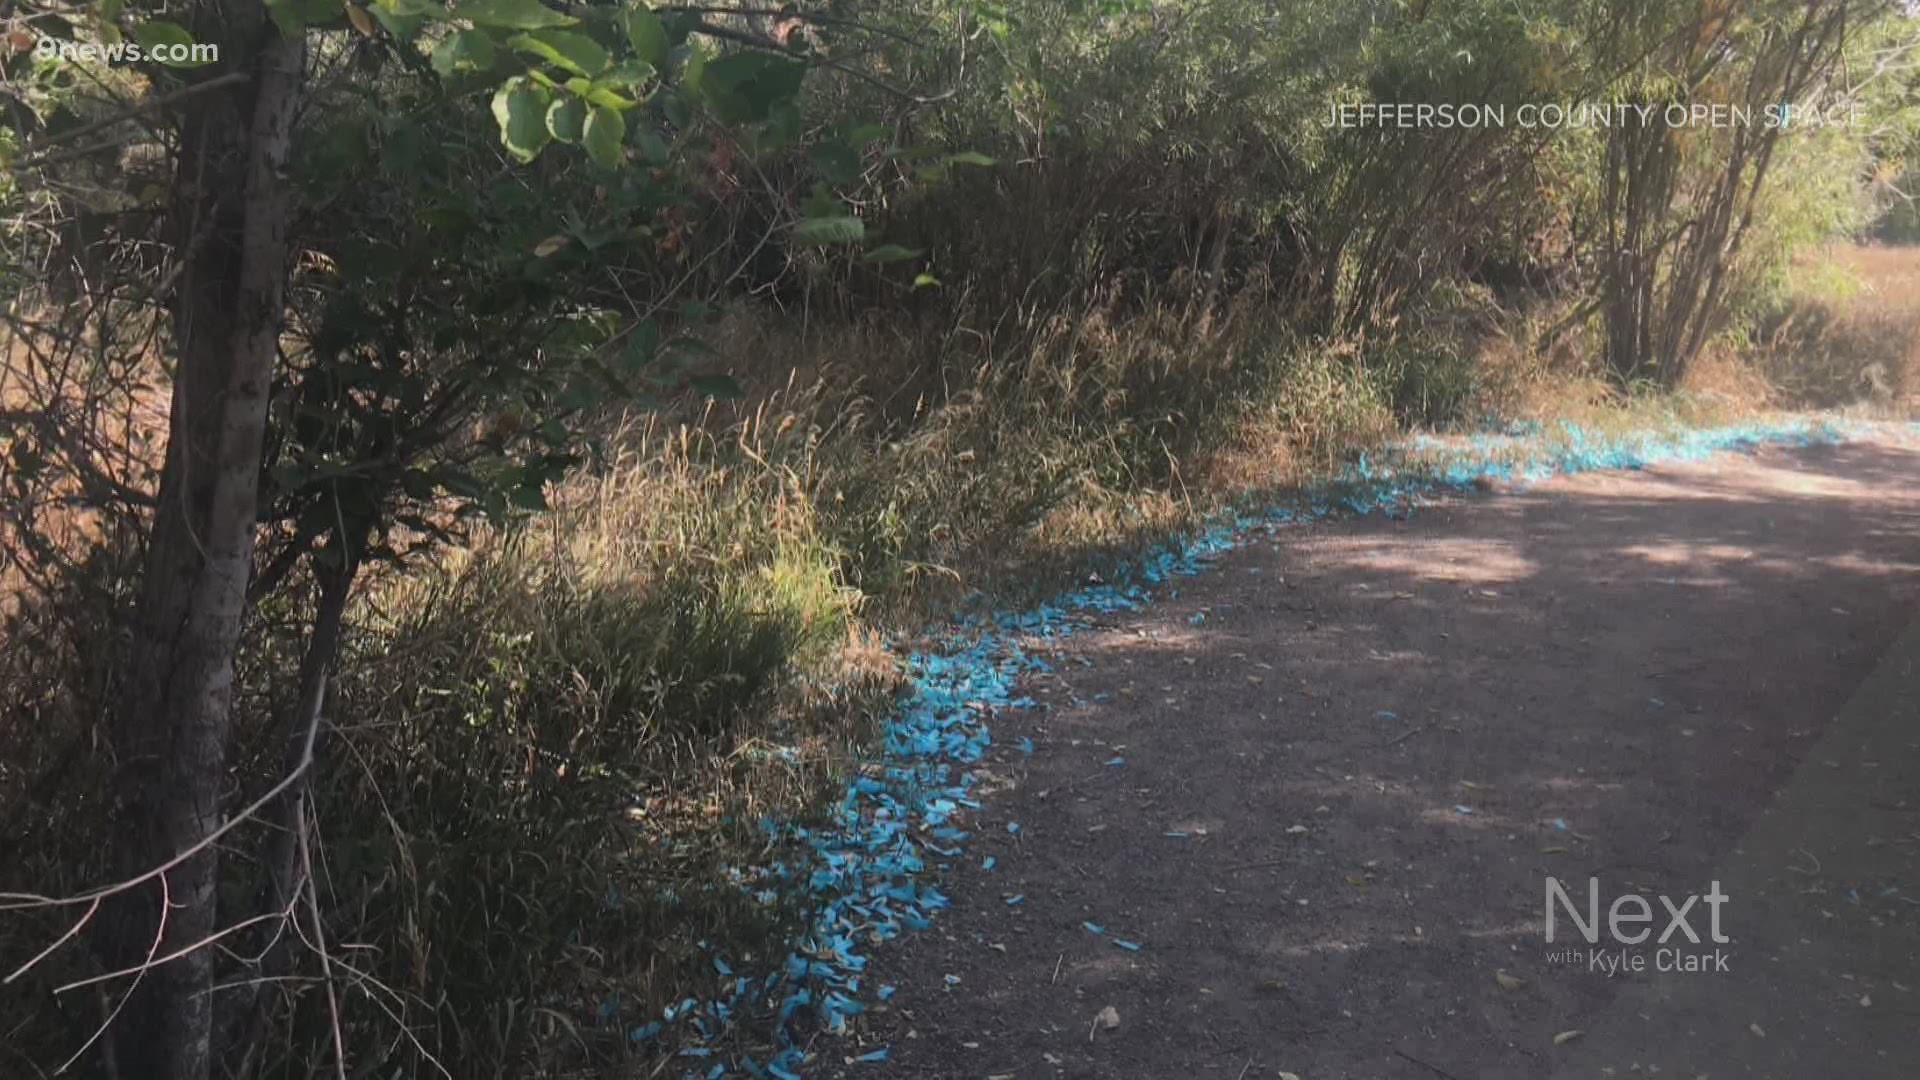 In today's edition of That's Not How You Colorado... It's a boy! It's also litter! Someone didn't clean up leftovers from a gender reveal party in Jefferson County.